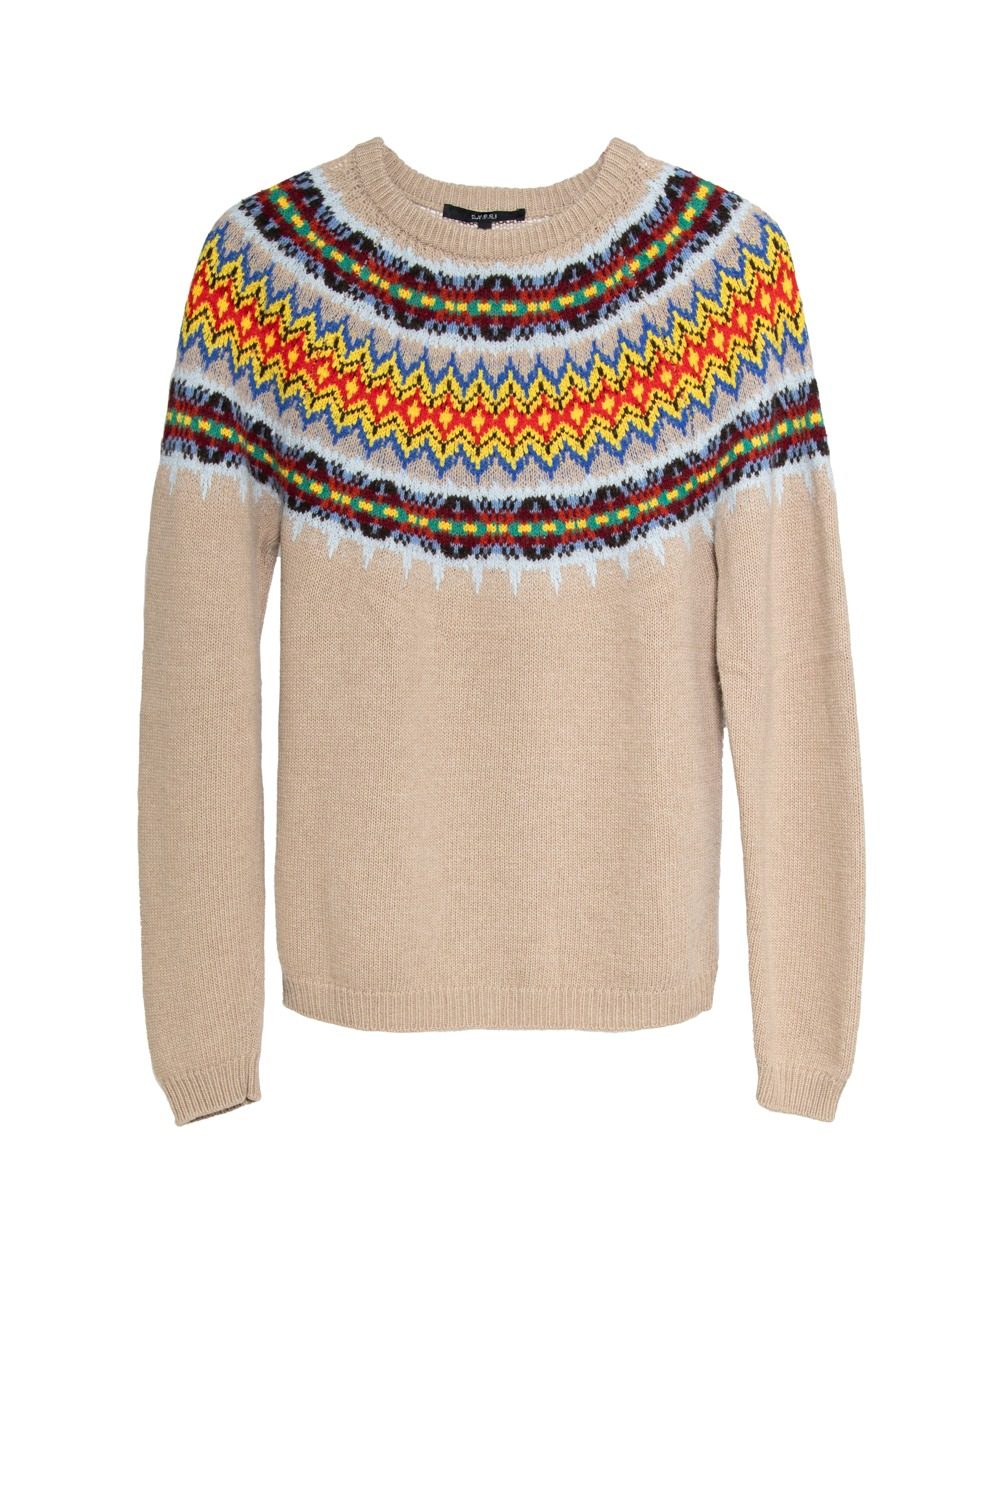 Thumbnail of http://Gucci%20Strickpullover%20in%20Beige%20mit%20Muster